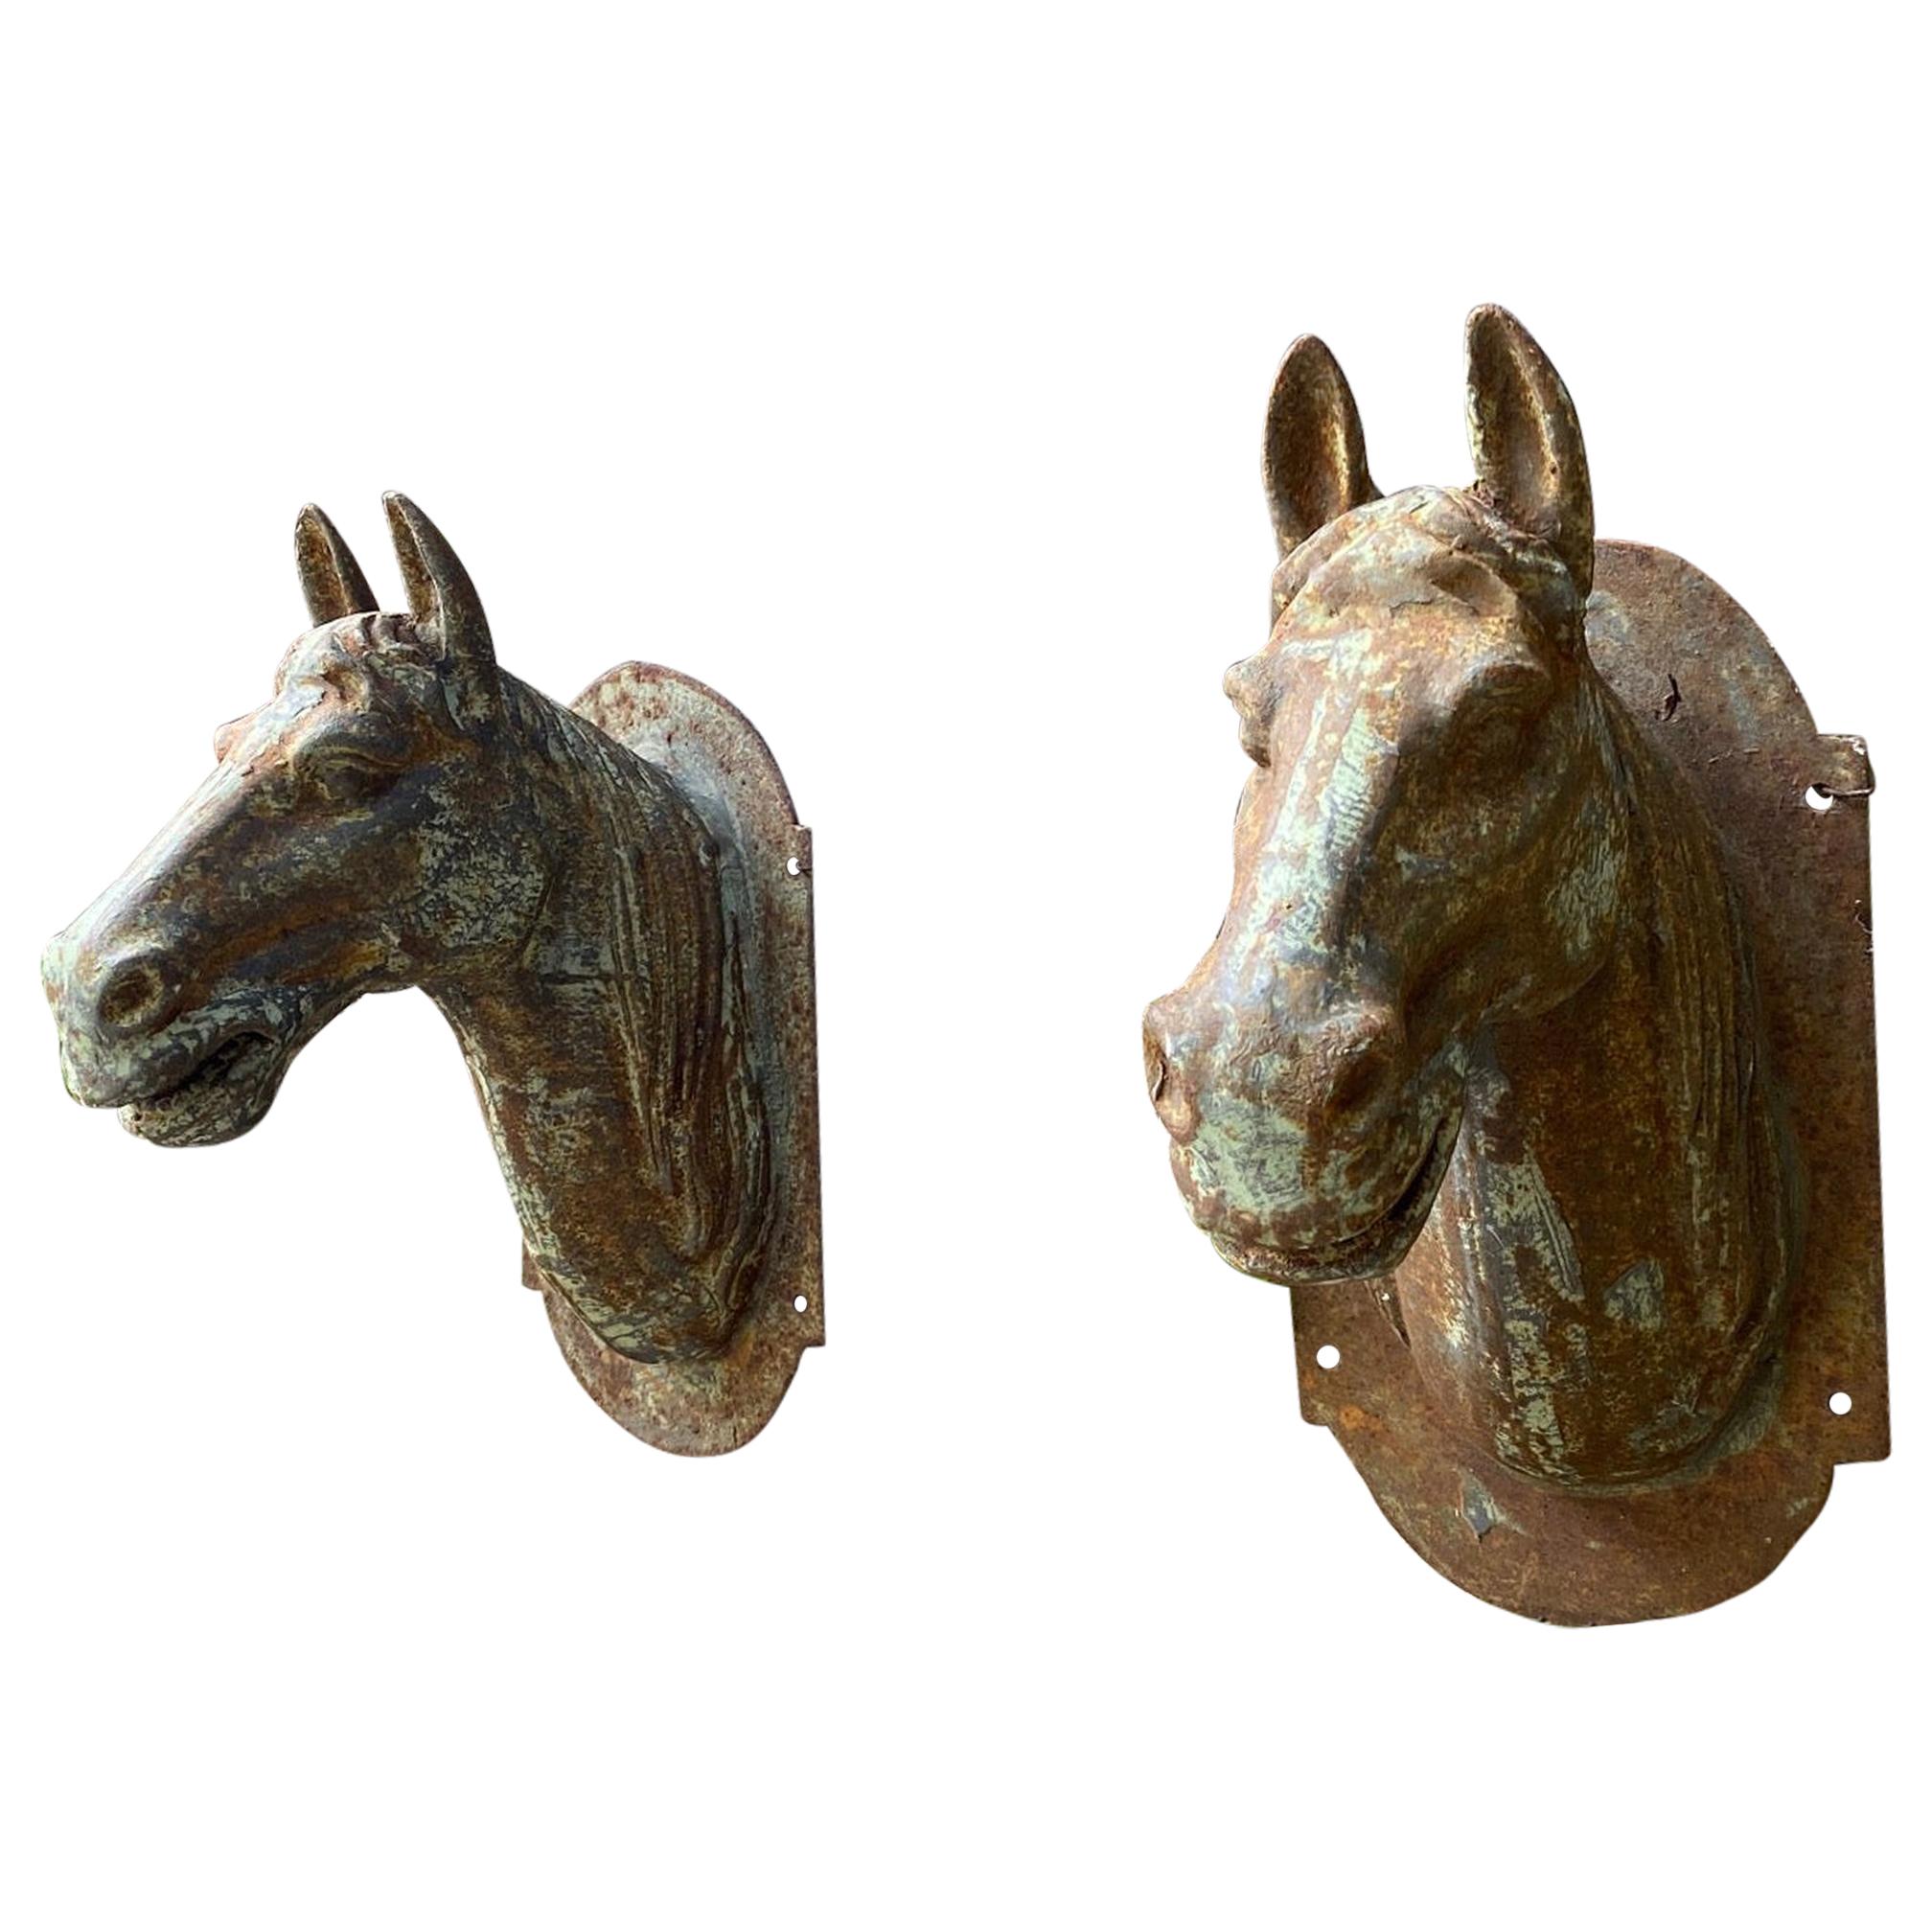 POTTERY BARN HORSE HEAD BOOKENDS NWT SADDLE UP FOR A BIT OF ELEGANT DÉCOR! 